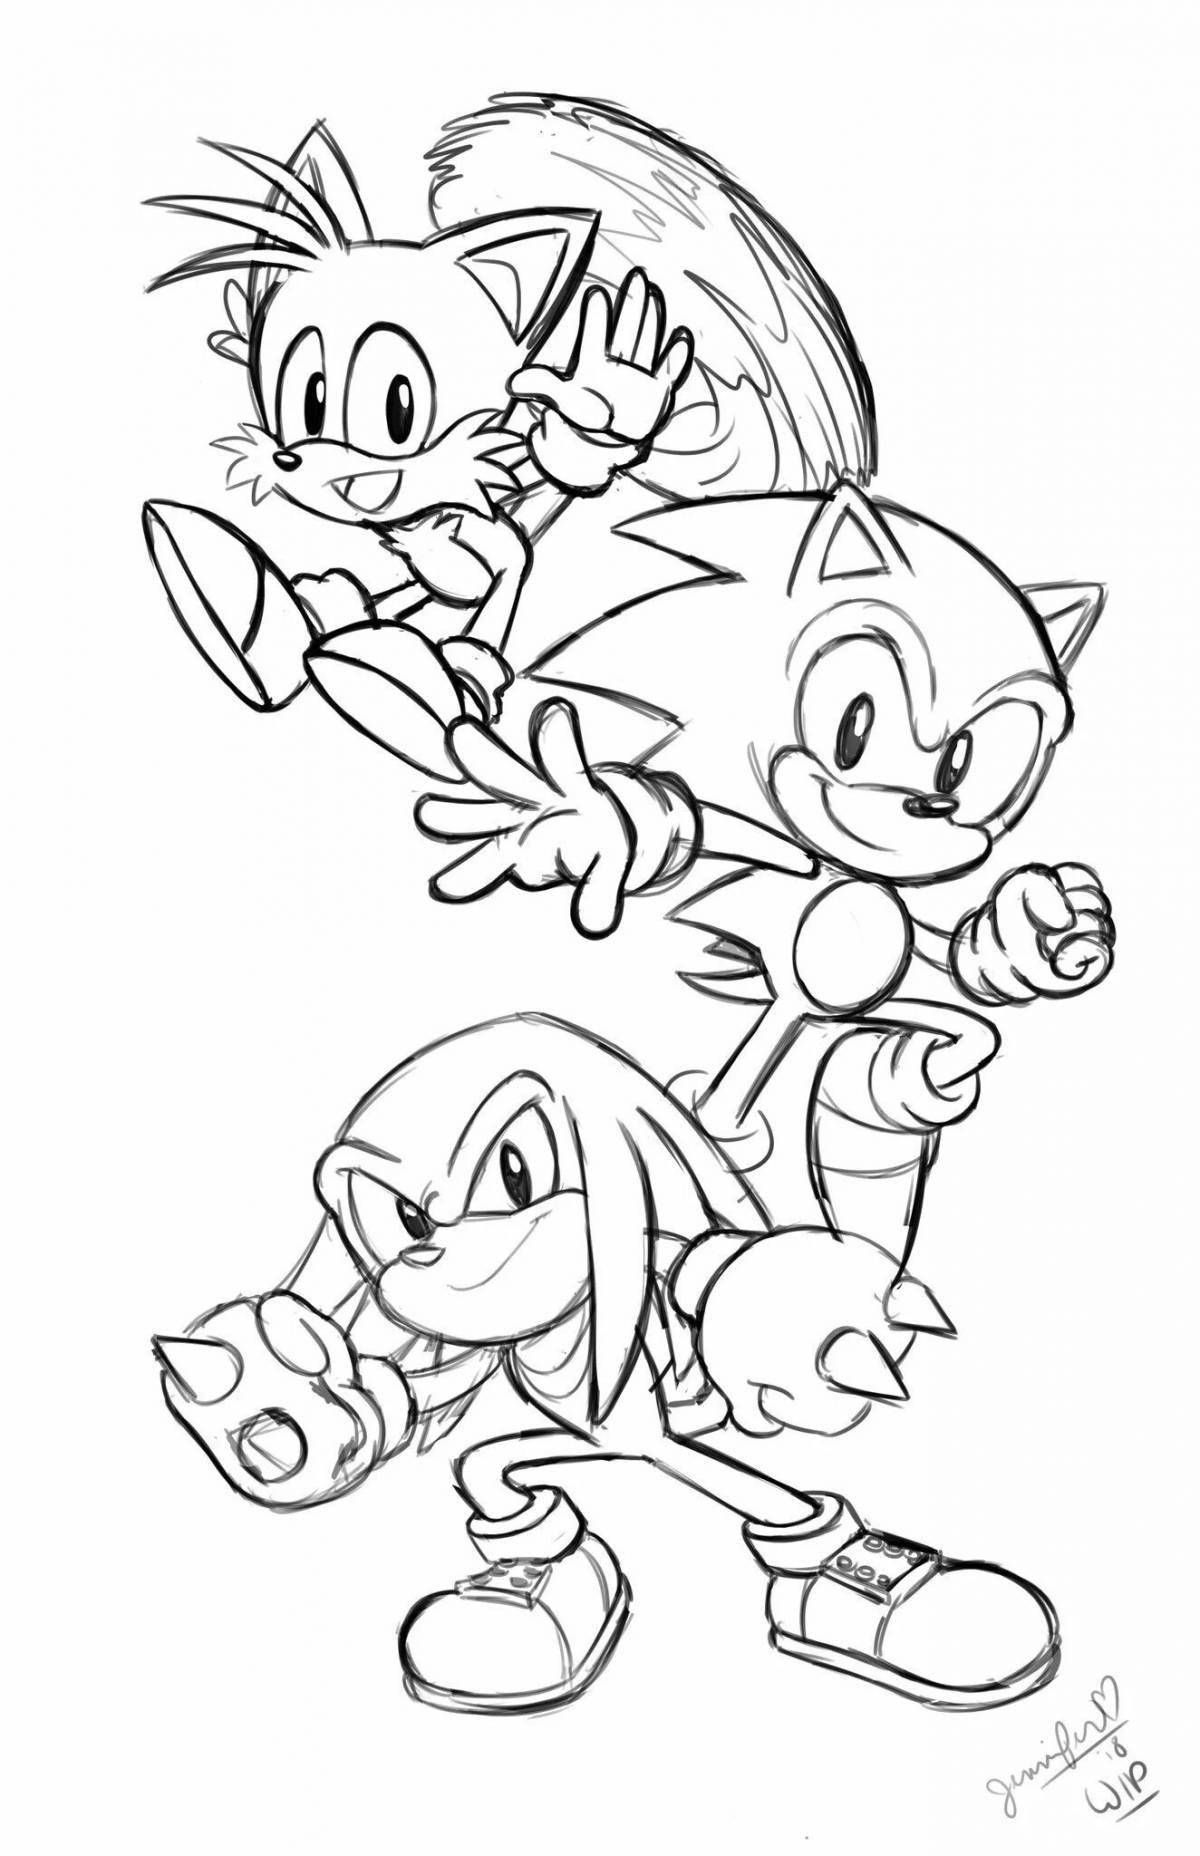 Splendorous baby sonic coloring page